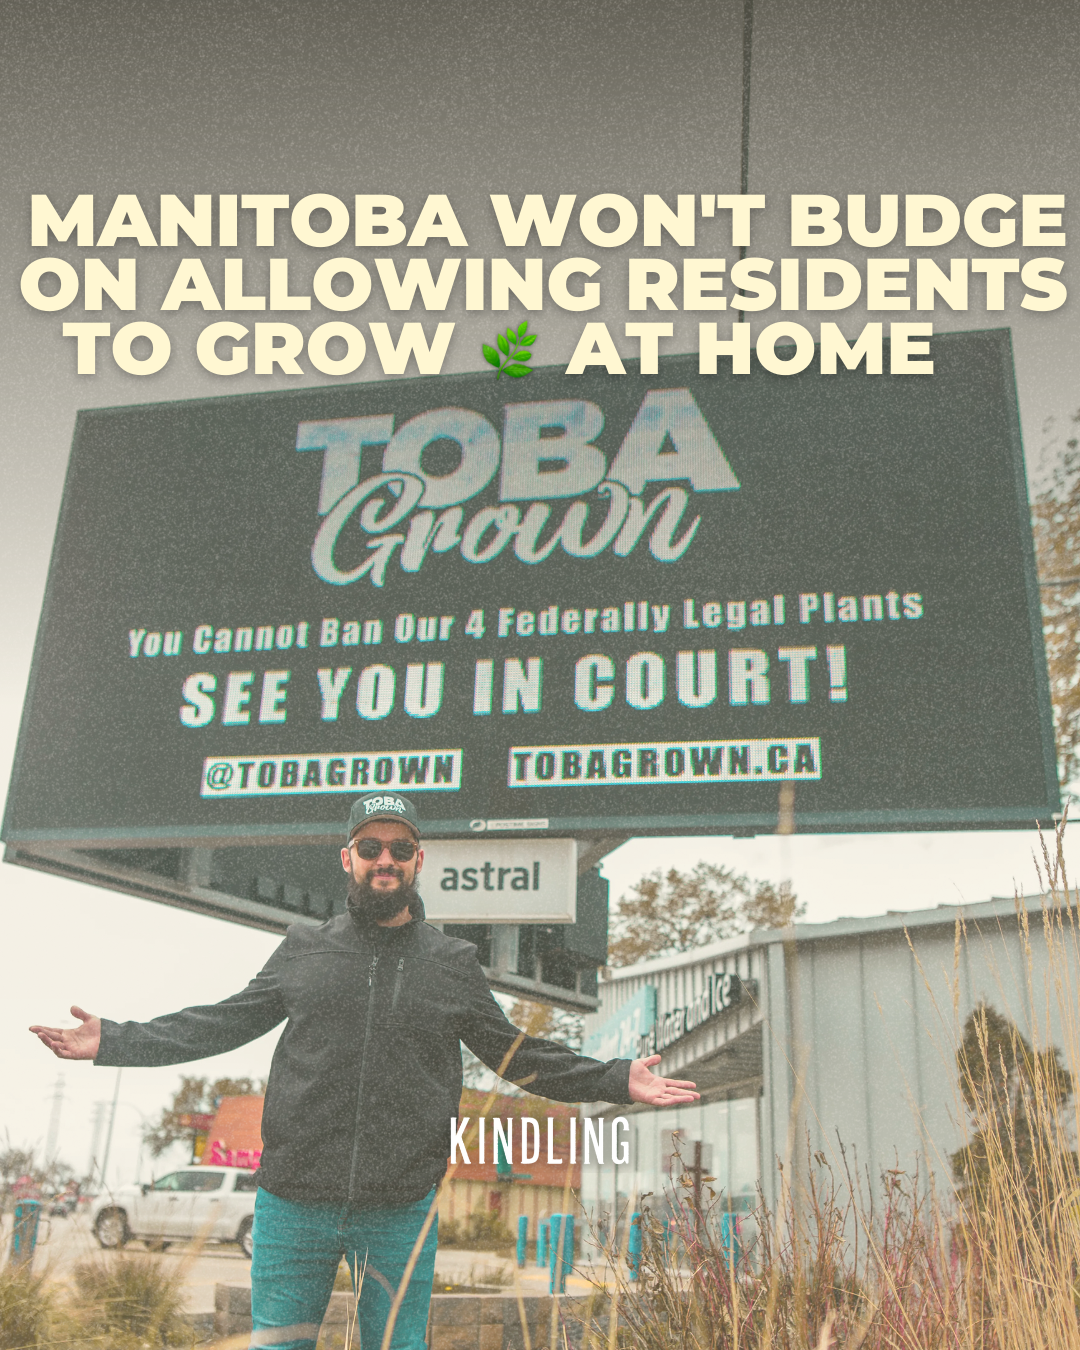 Manitoba won't budge on allowing residents to grow cannabis at home